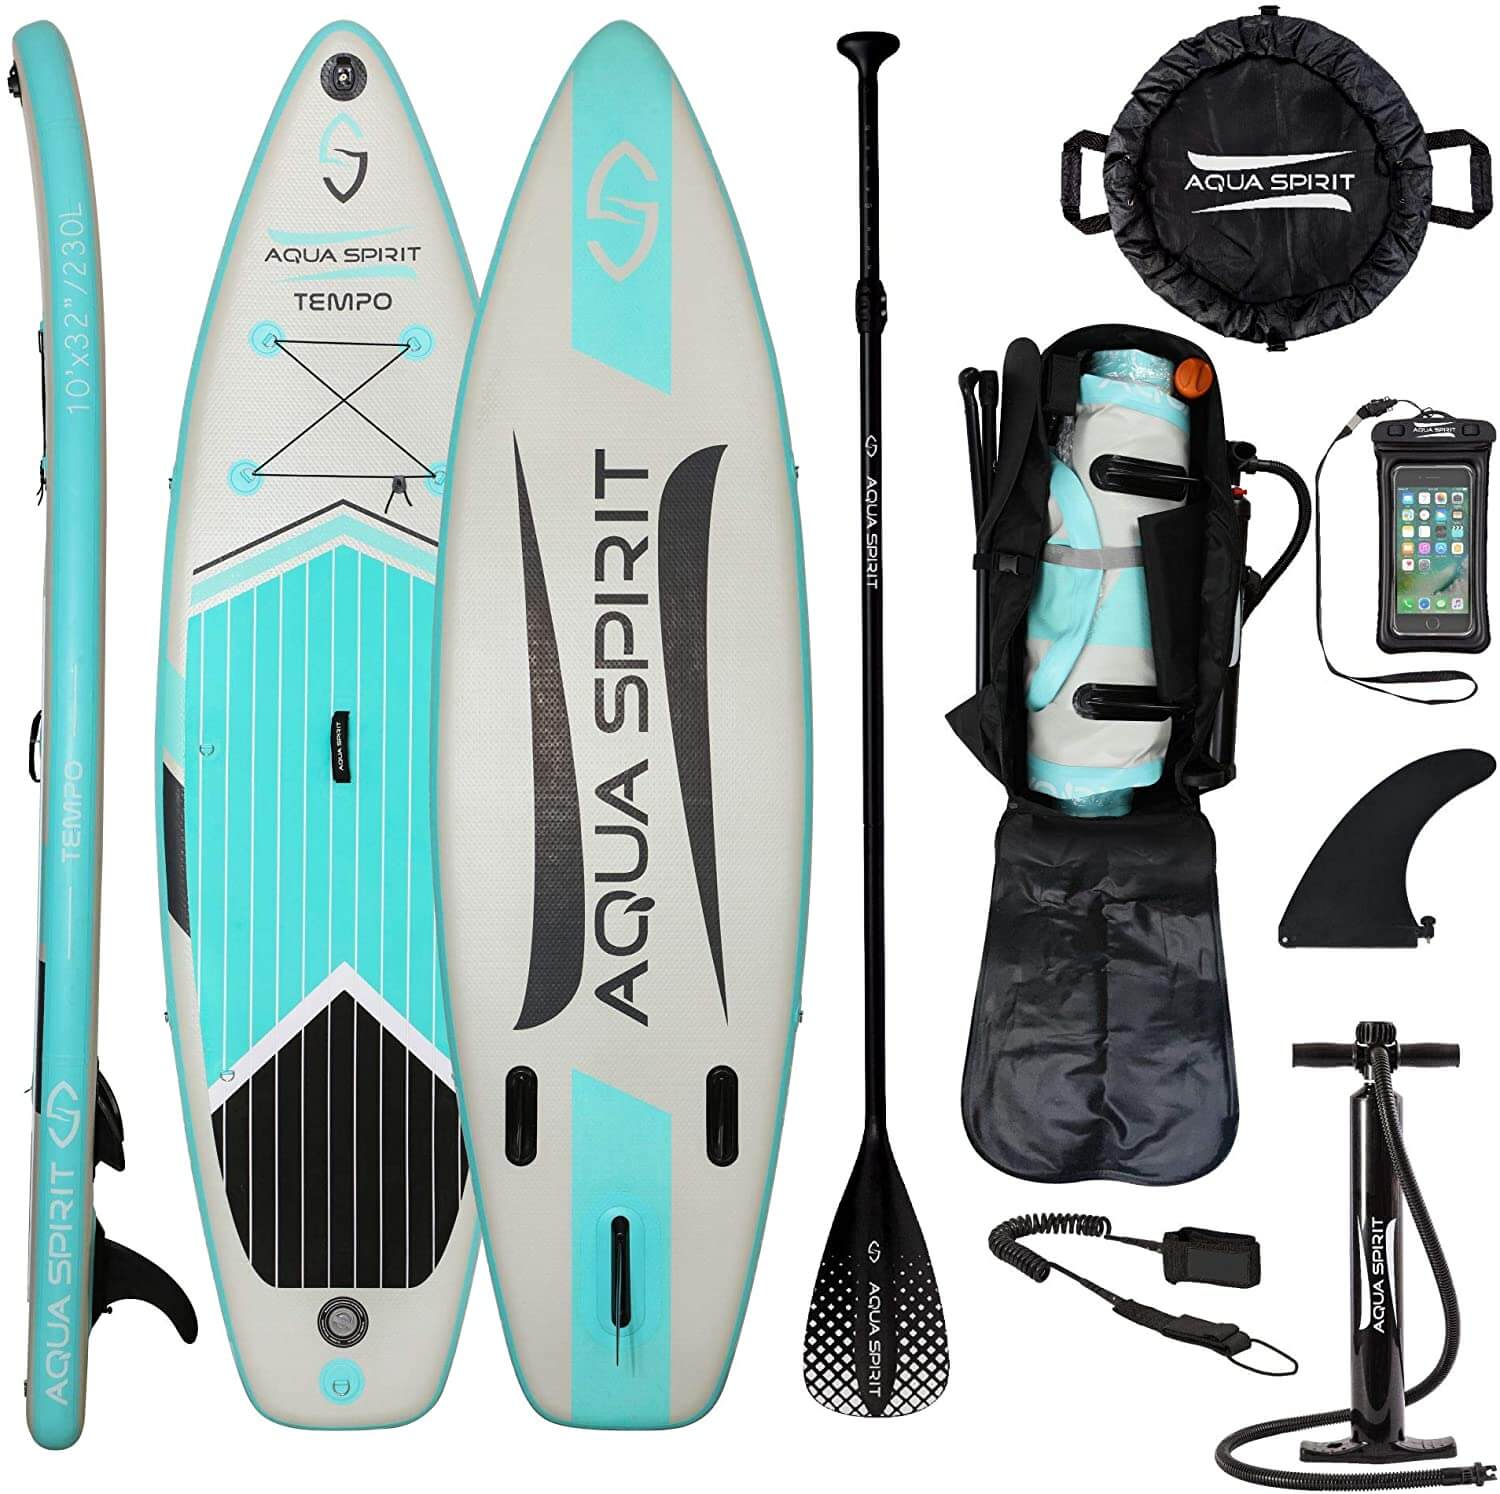 Lidl selling wetsuits, aqua shoes and inflatable paddle board in